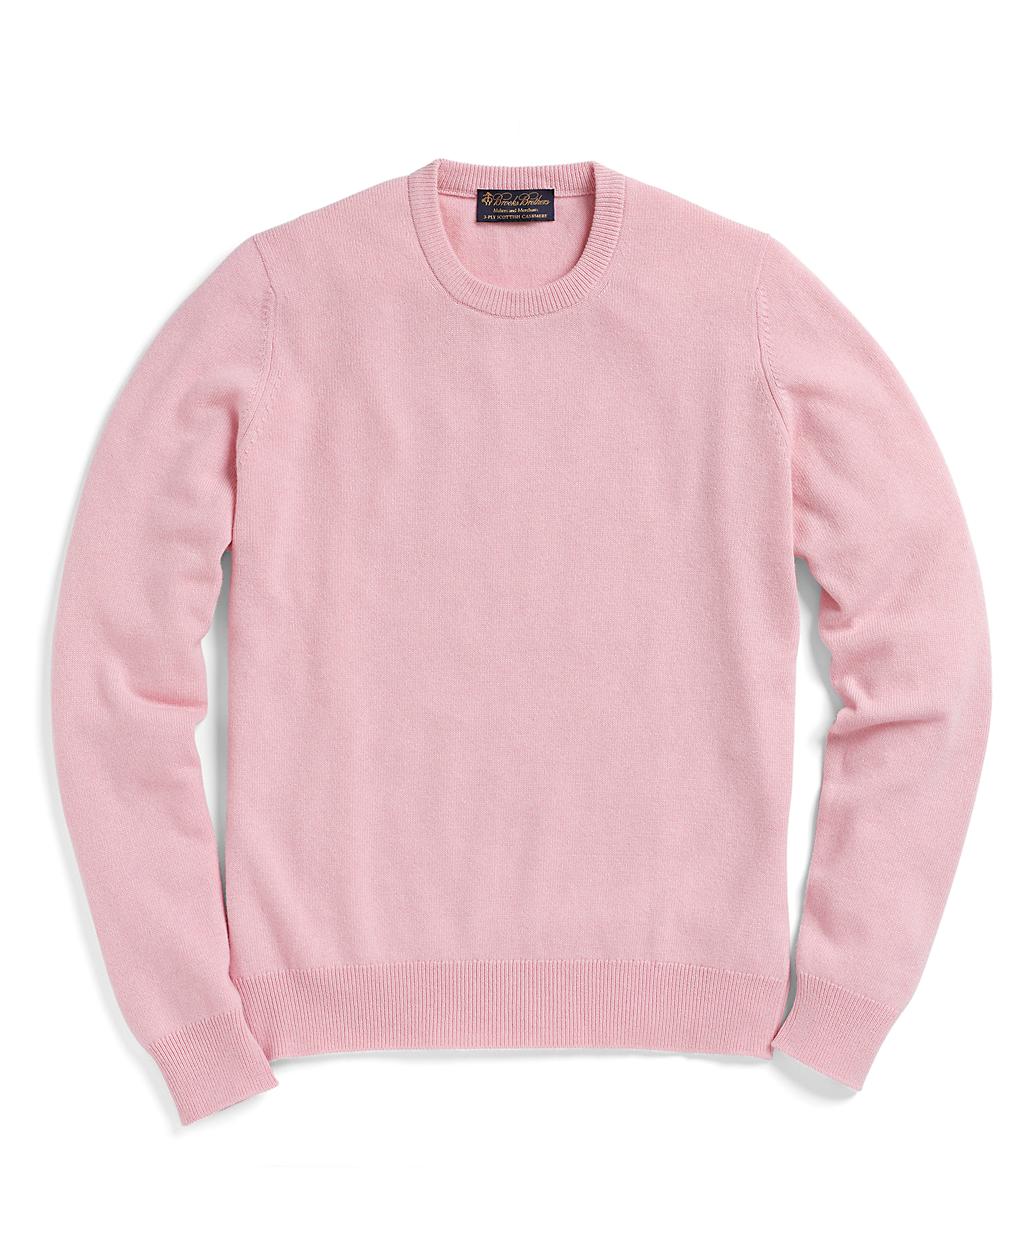 Brooks Brothers Cashmere Crewneck Sweater in Light-Pink (Pink) for Men -  Lyst